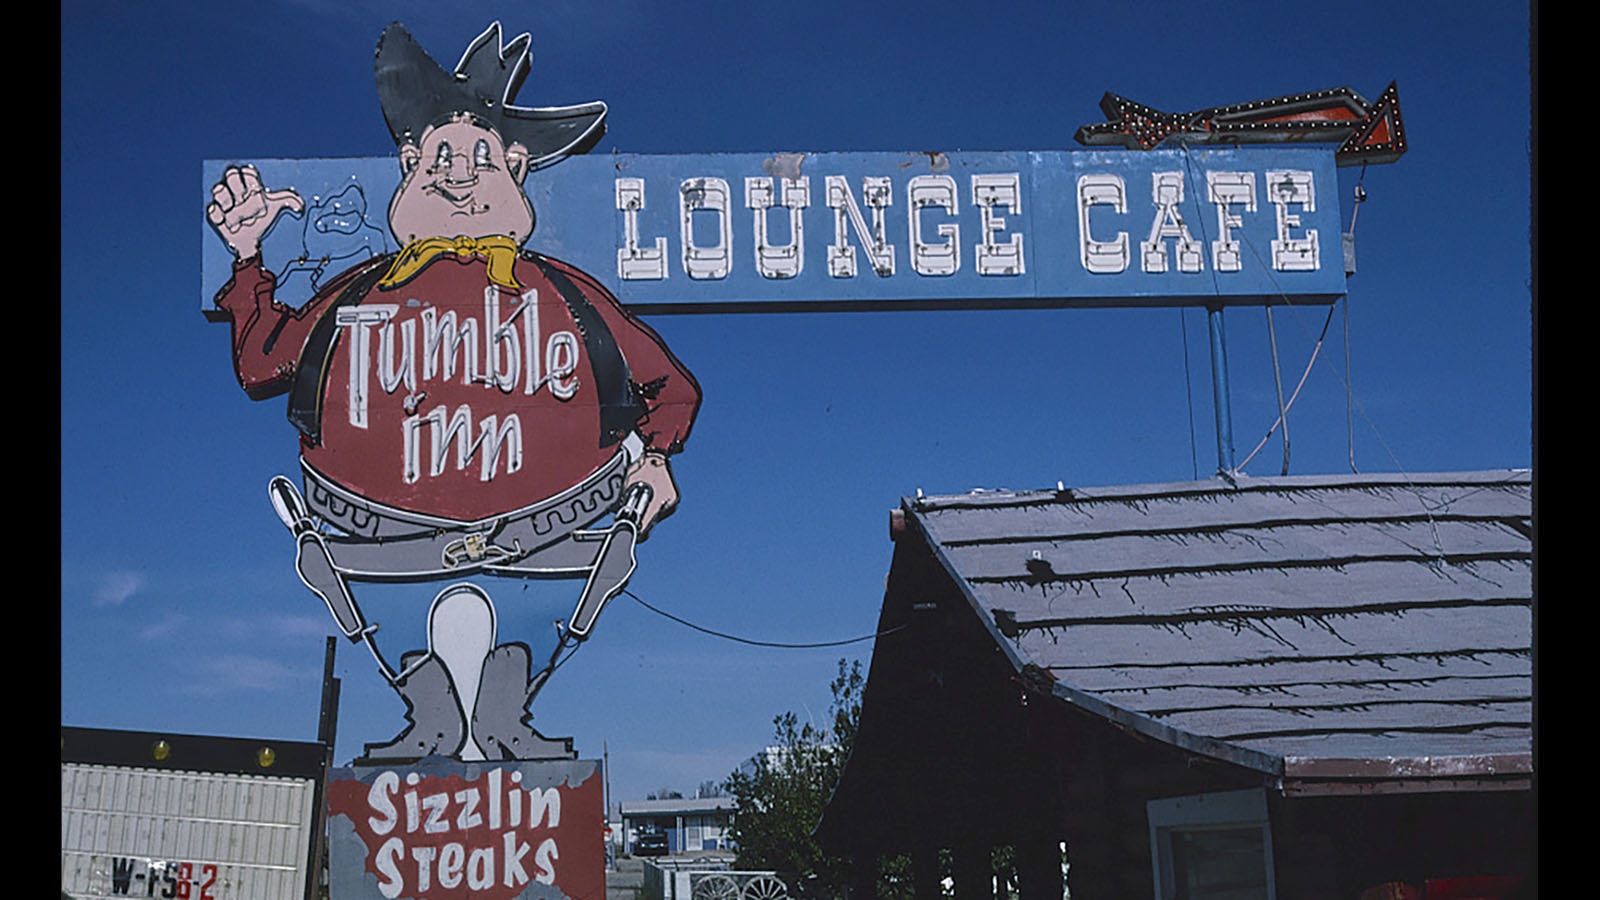 Tumble Inn as seen in the John Margolies Roadside America photograph archive in the Library of Congress.